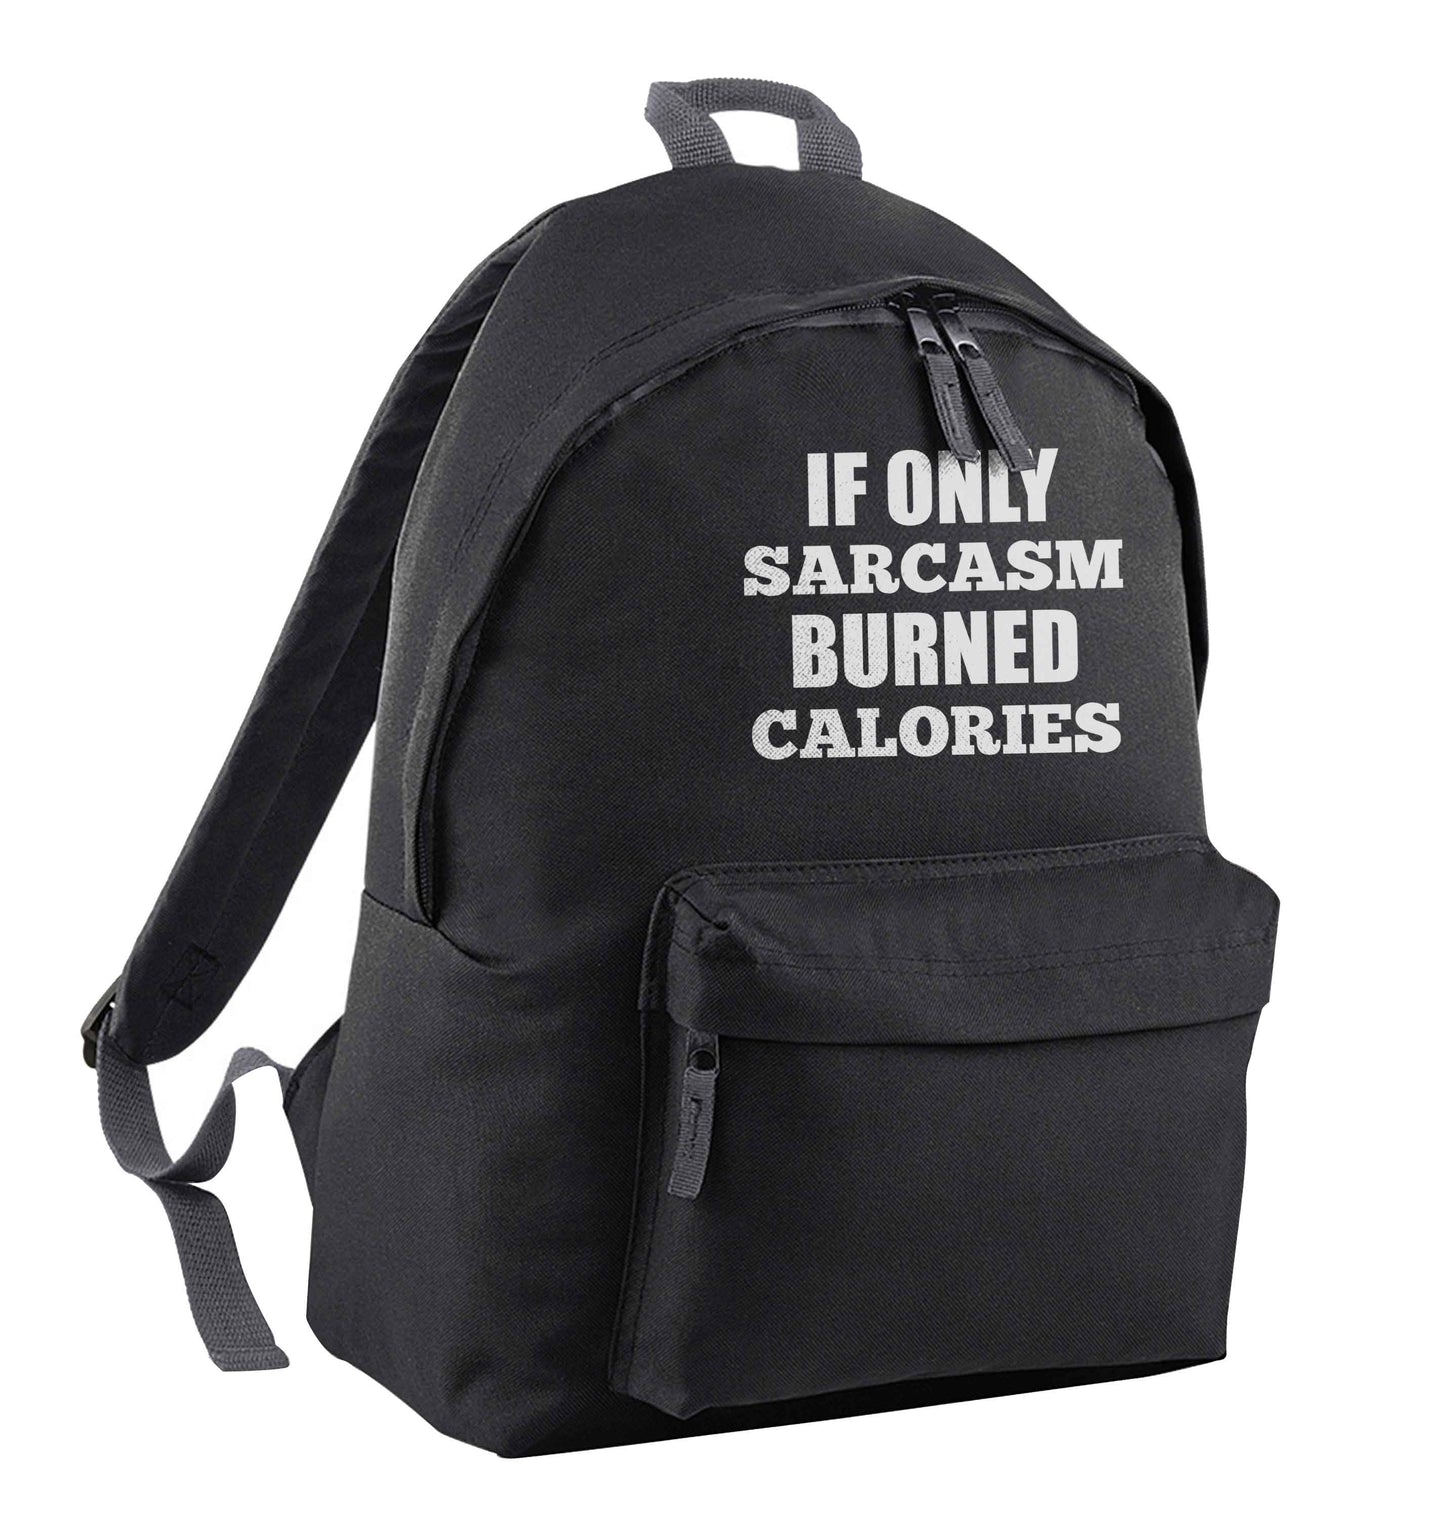 If only sarcasm burned calories black adults backpack